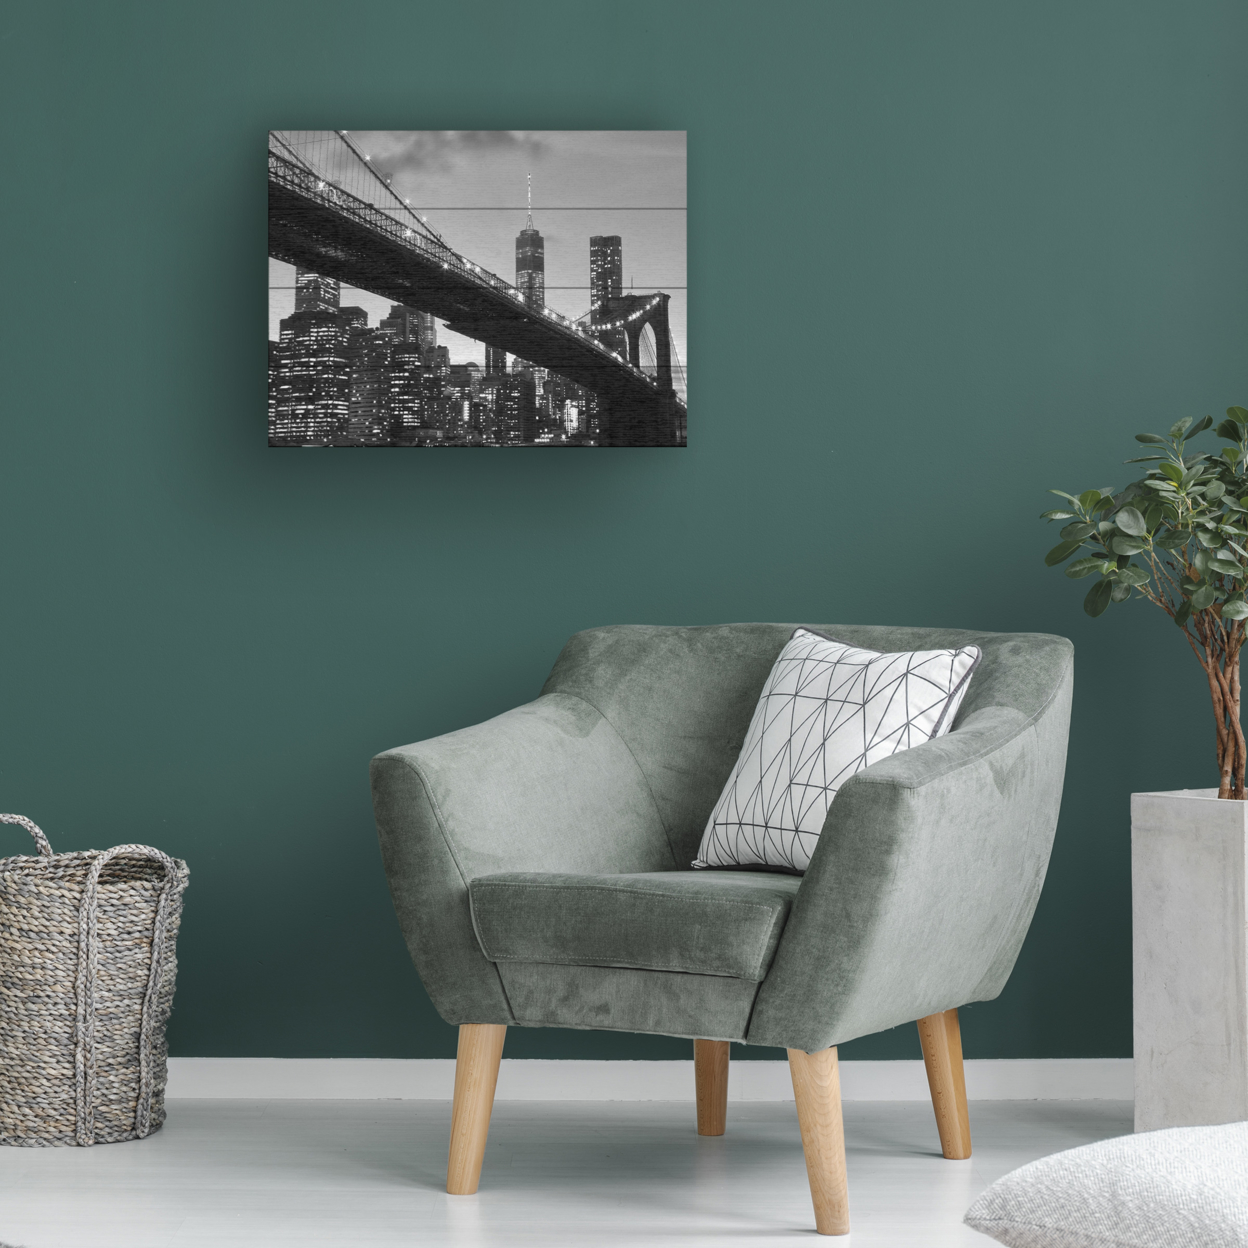 Wall Art 12 X 16 Inches Titled Brooklyn Bridge 5 Ready To Hang Printed On Wooden Planks